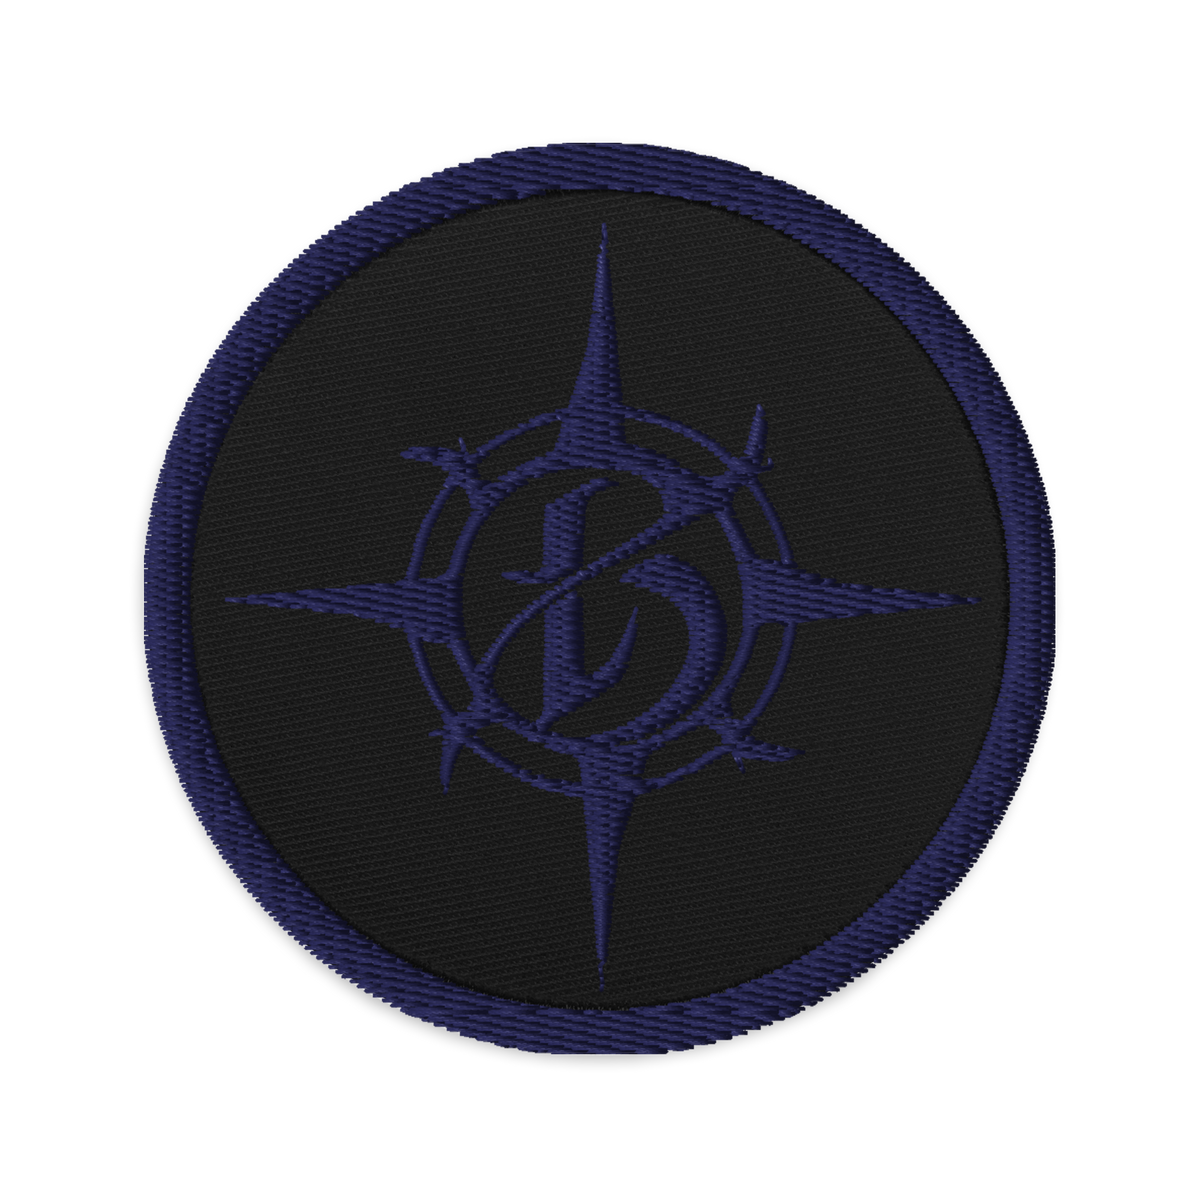 Borealis Compass Logo Embroidered Patch - Navy Blue